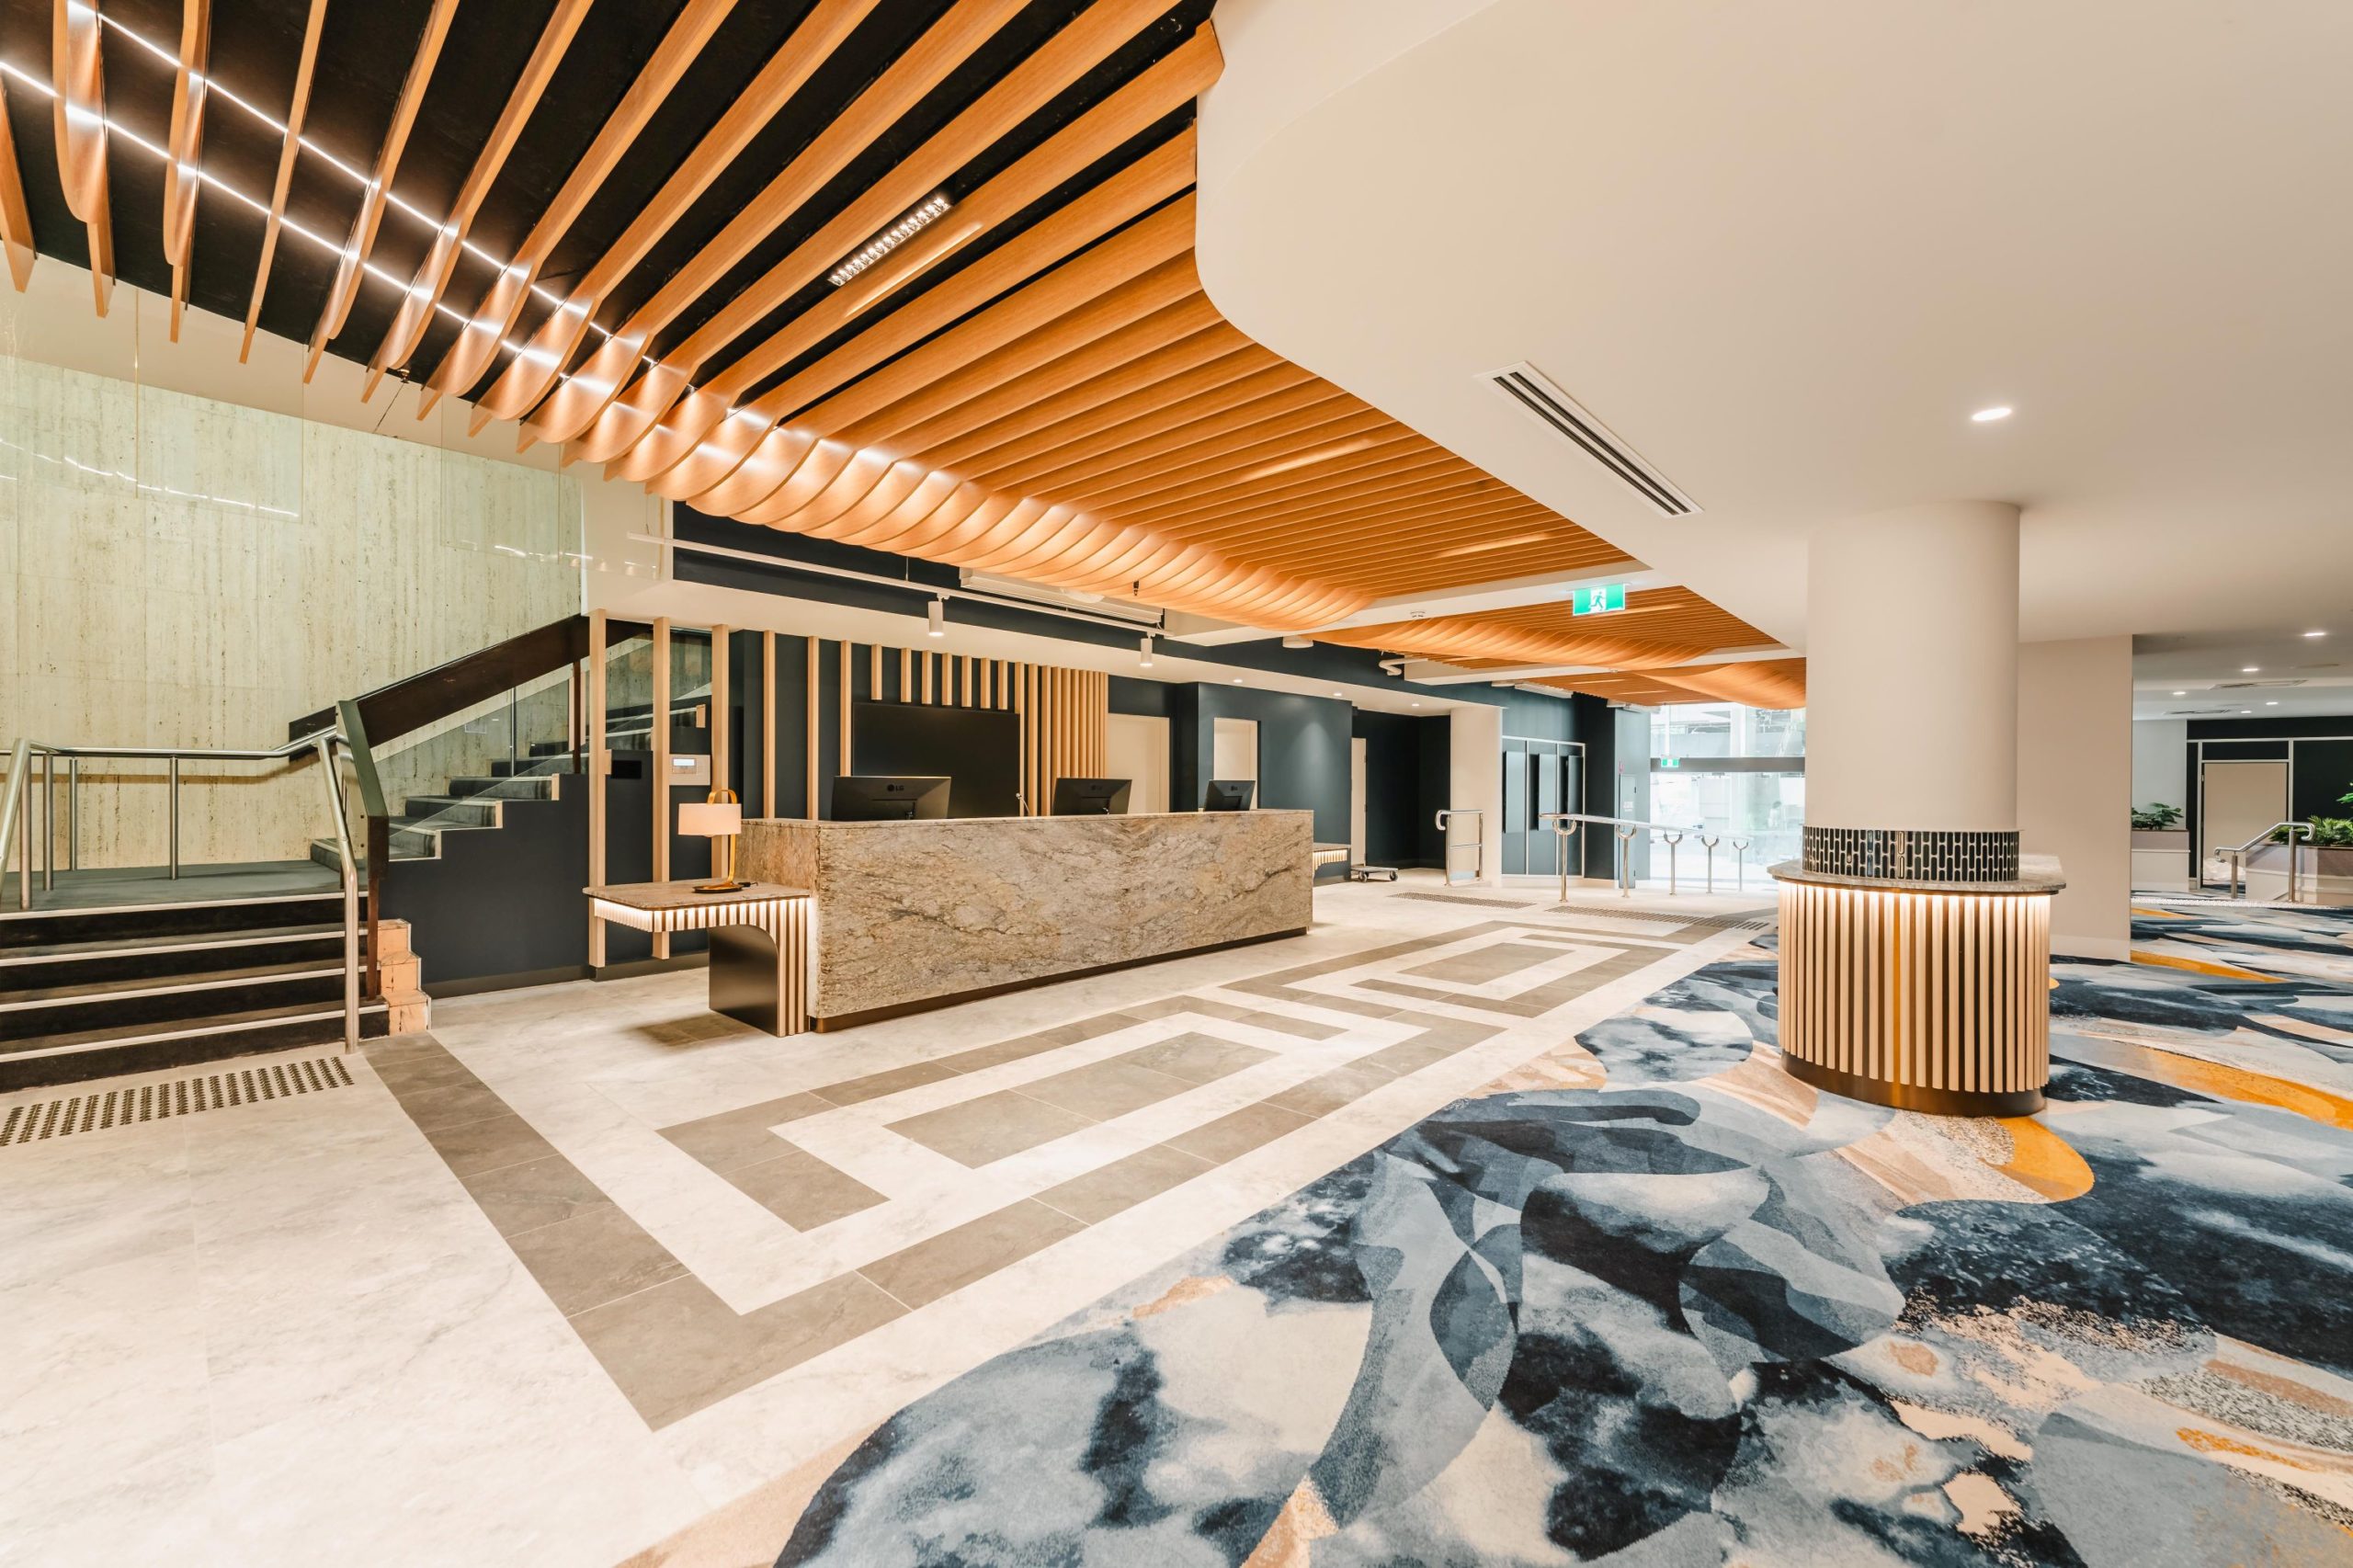 Leagues club unveils new look - Central Coast News